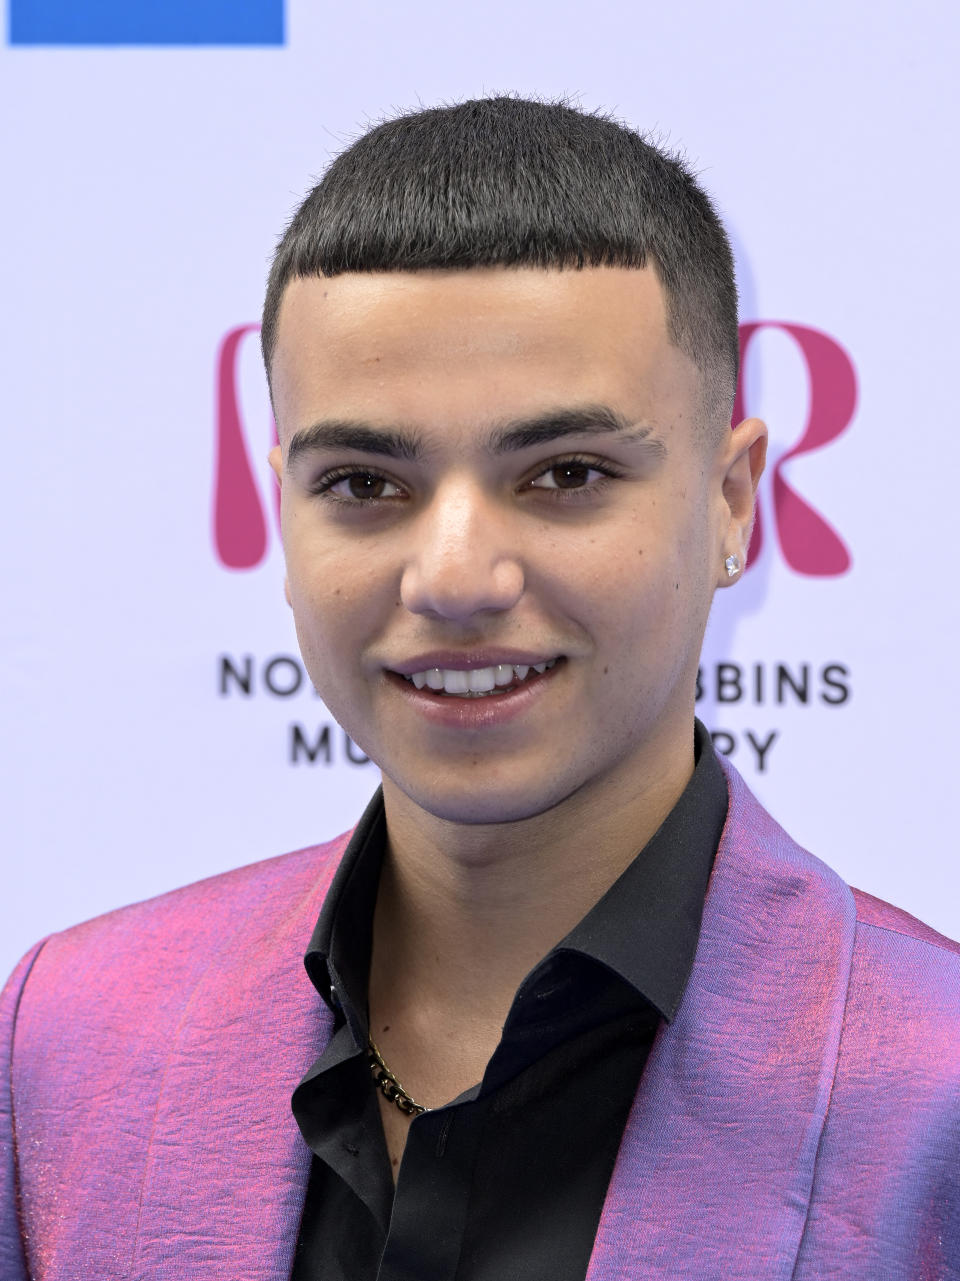 Junior Andre attends the Nordoff and Robbins O2 Silver Clef Awards 2023 at JW Marriott Grosvenor House on June 30, 2023 in London, England. (Photo by Gareth Cattermole/Getty Images)